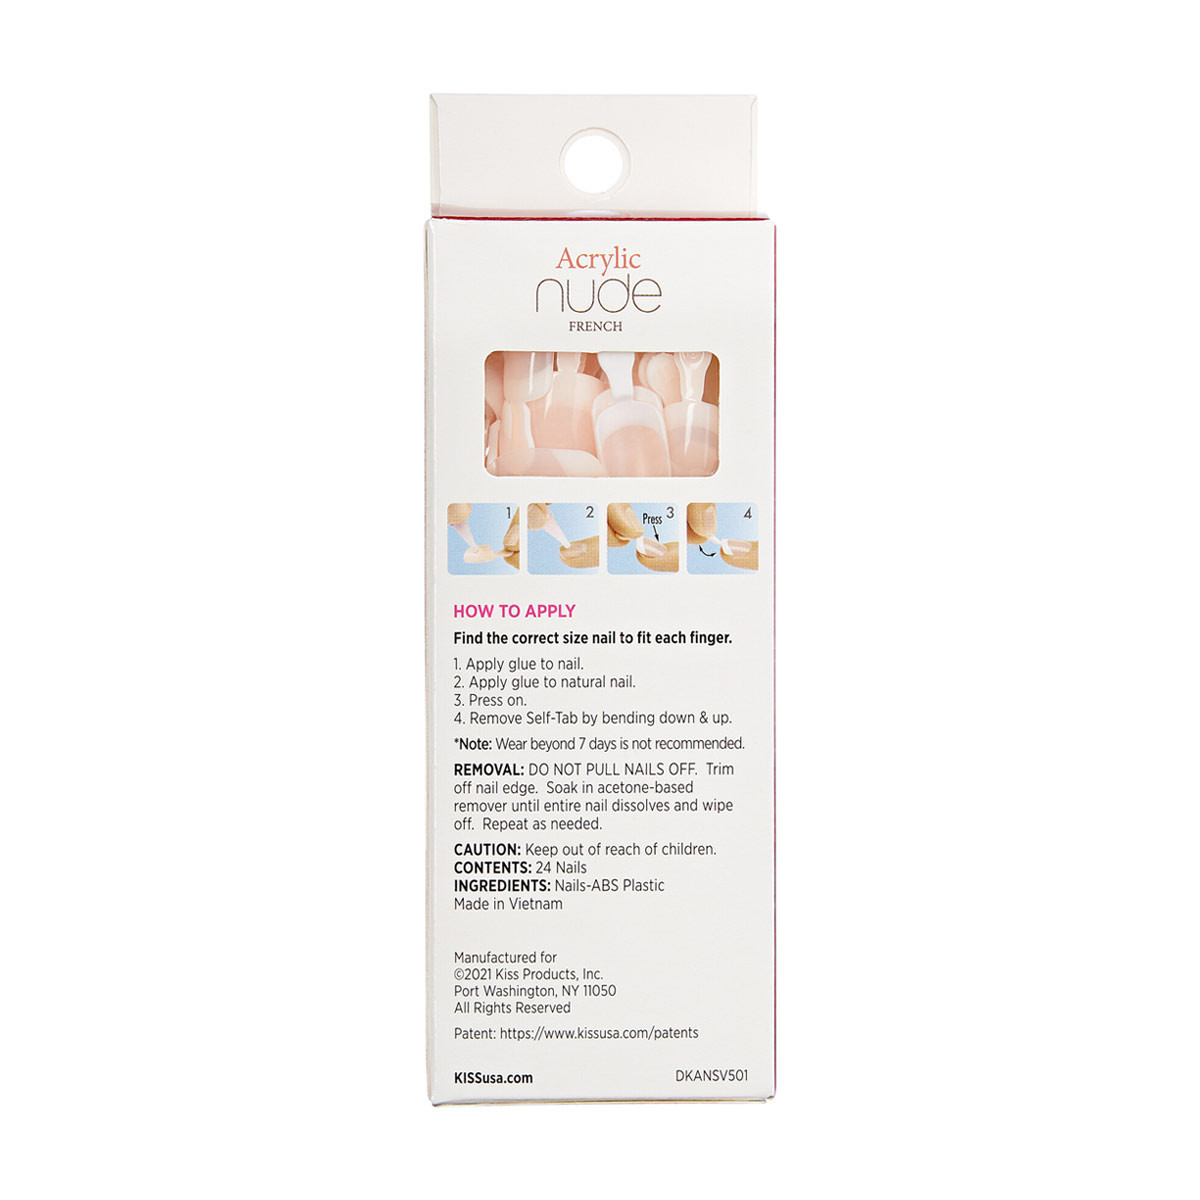 KISS Salon Acrylic Nude French Manicure Natural Ultra-Smooth Fake Nails